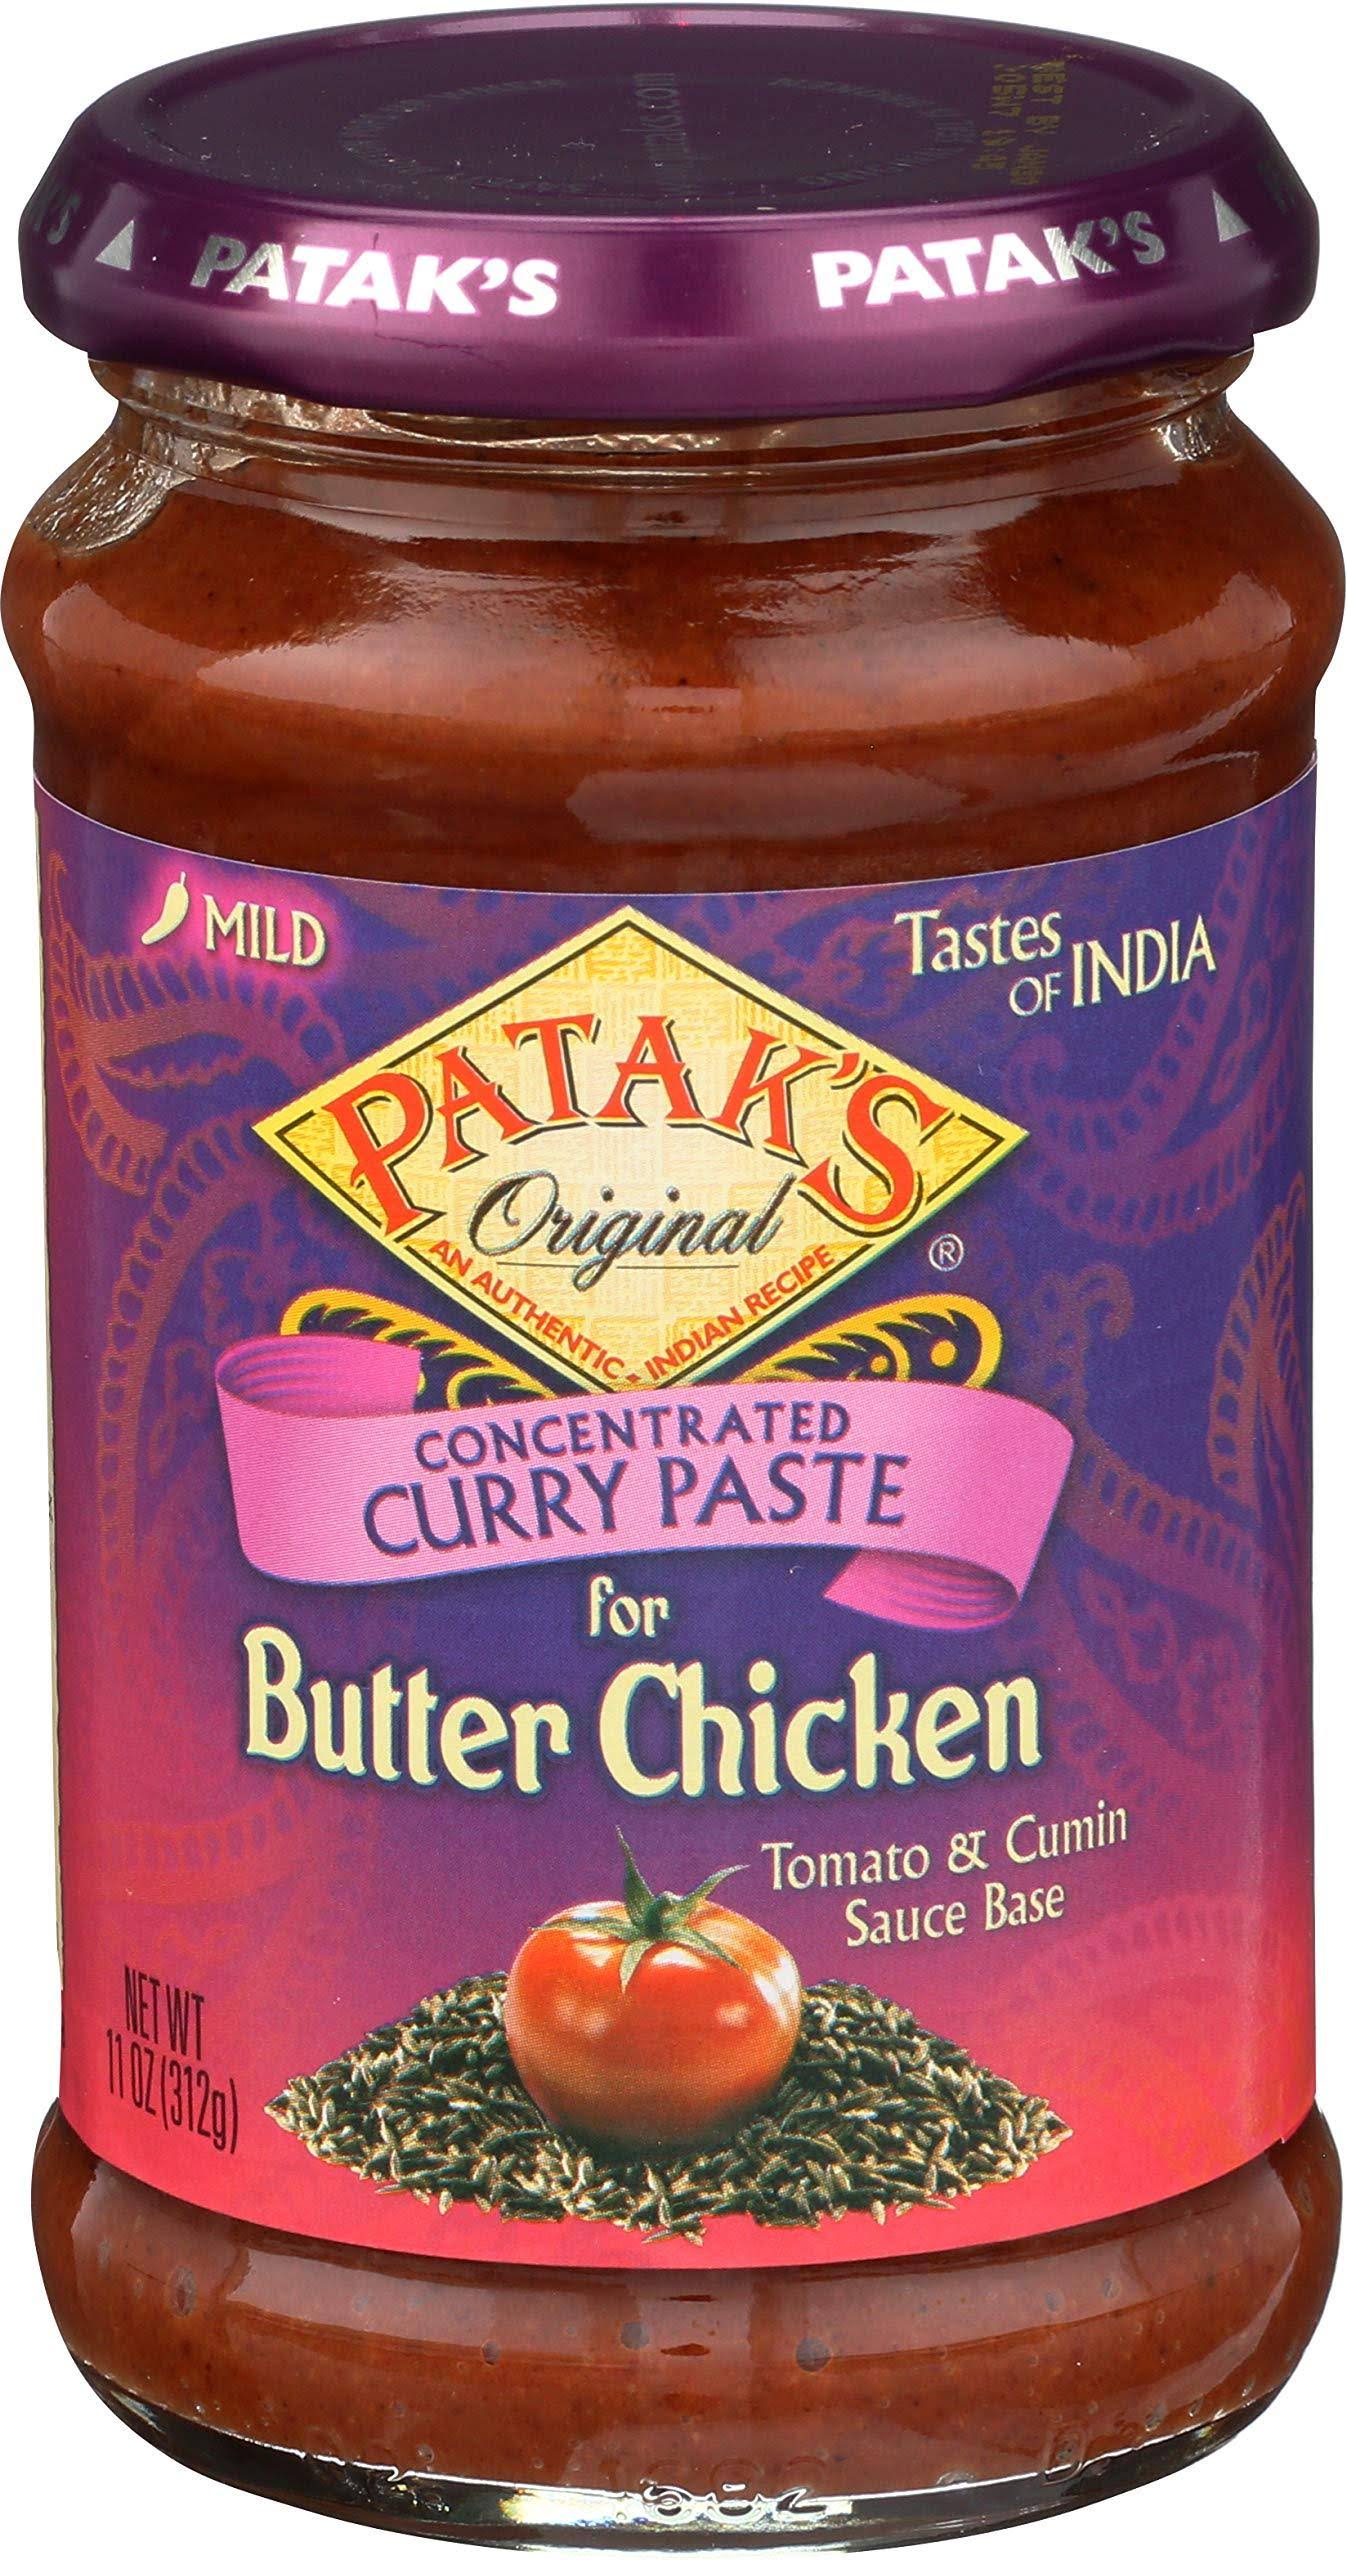 Patak's Concentrated Curry Paste for Butter Chicken - 11 oz